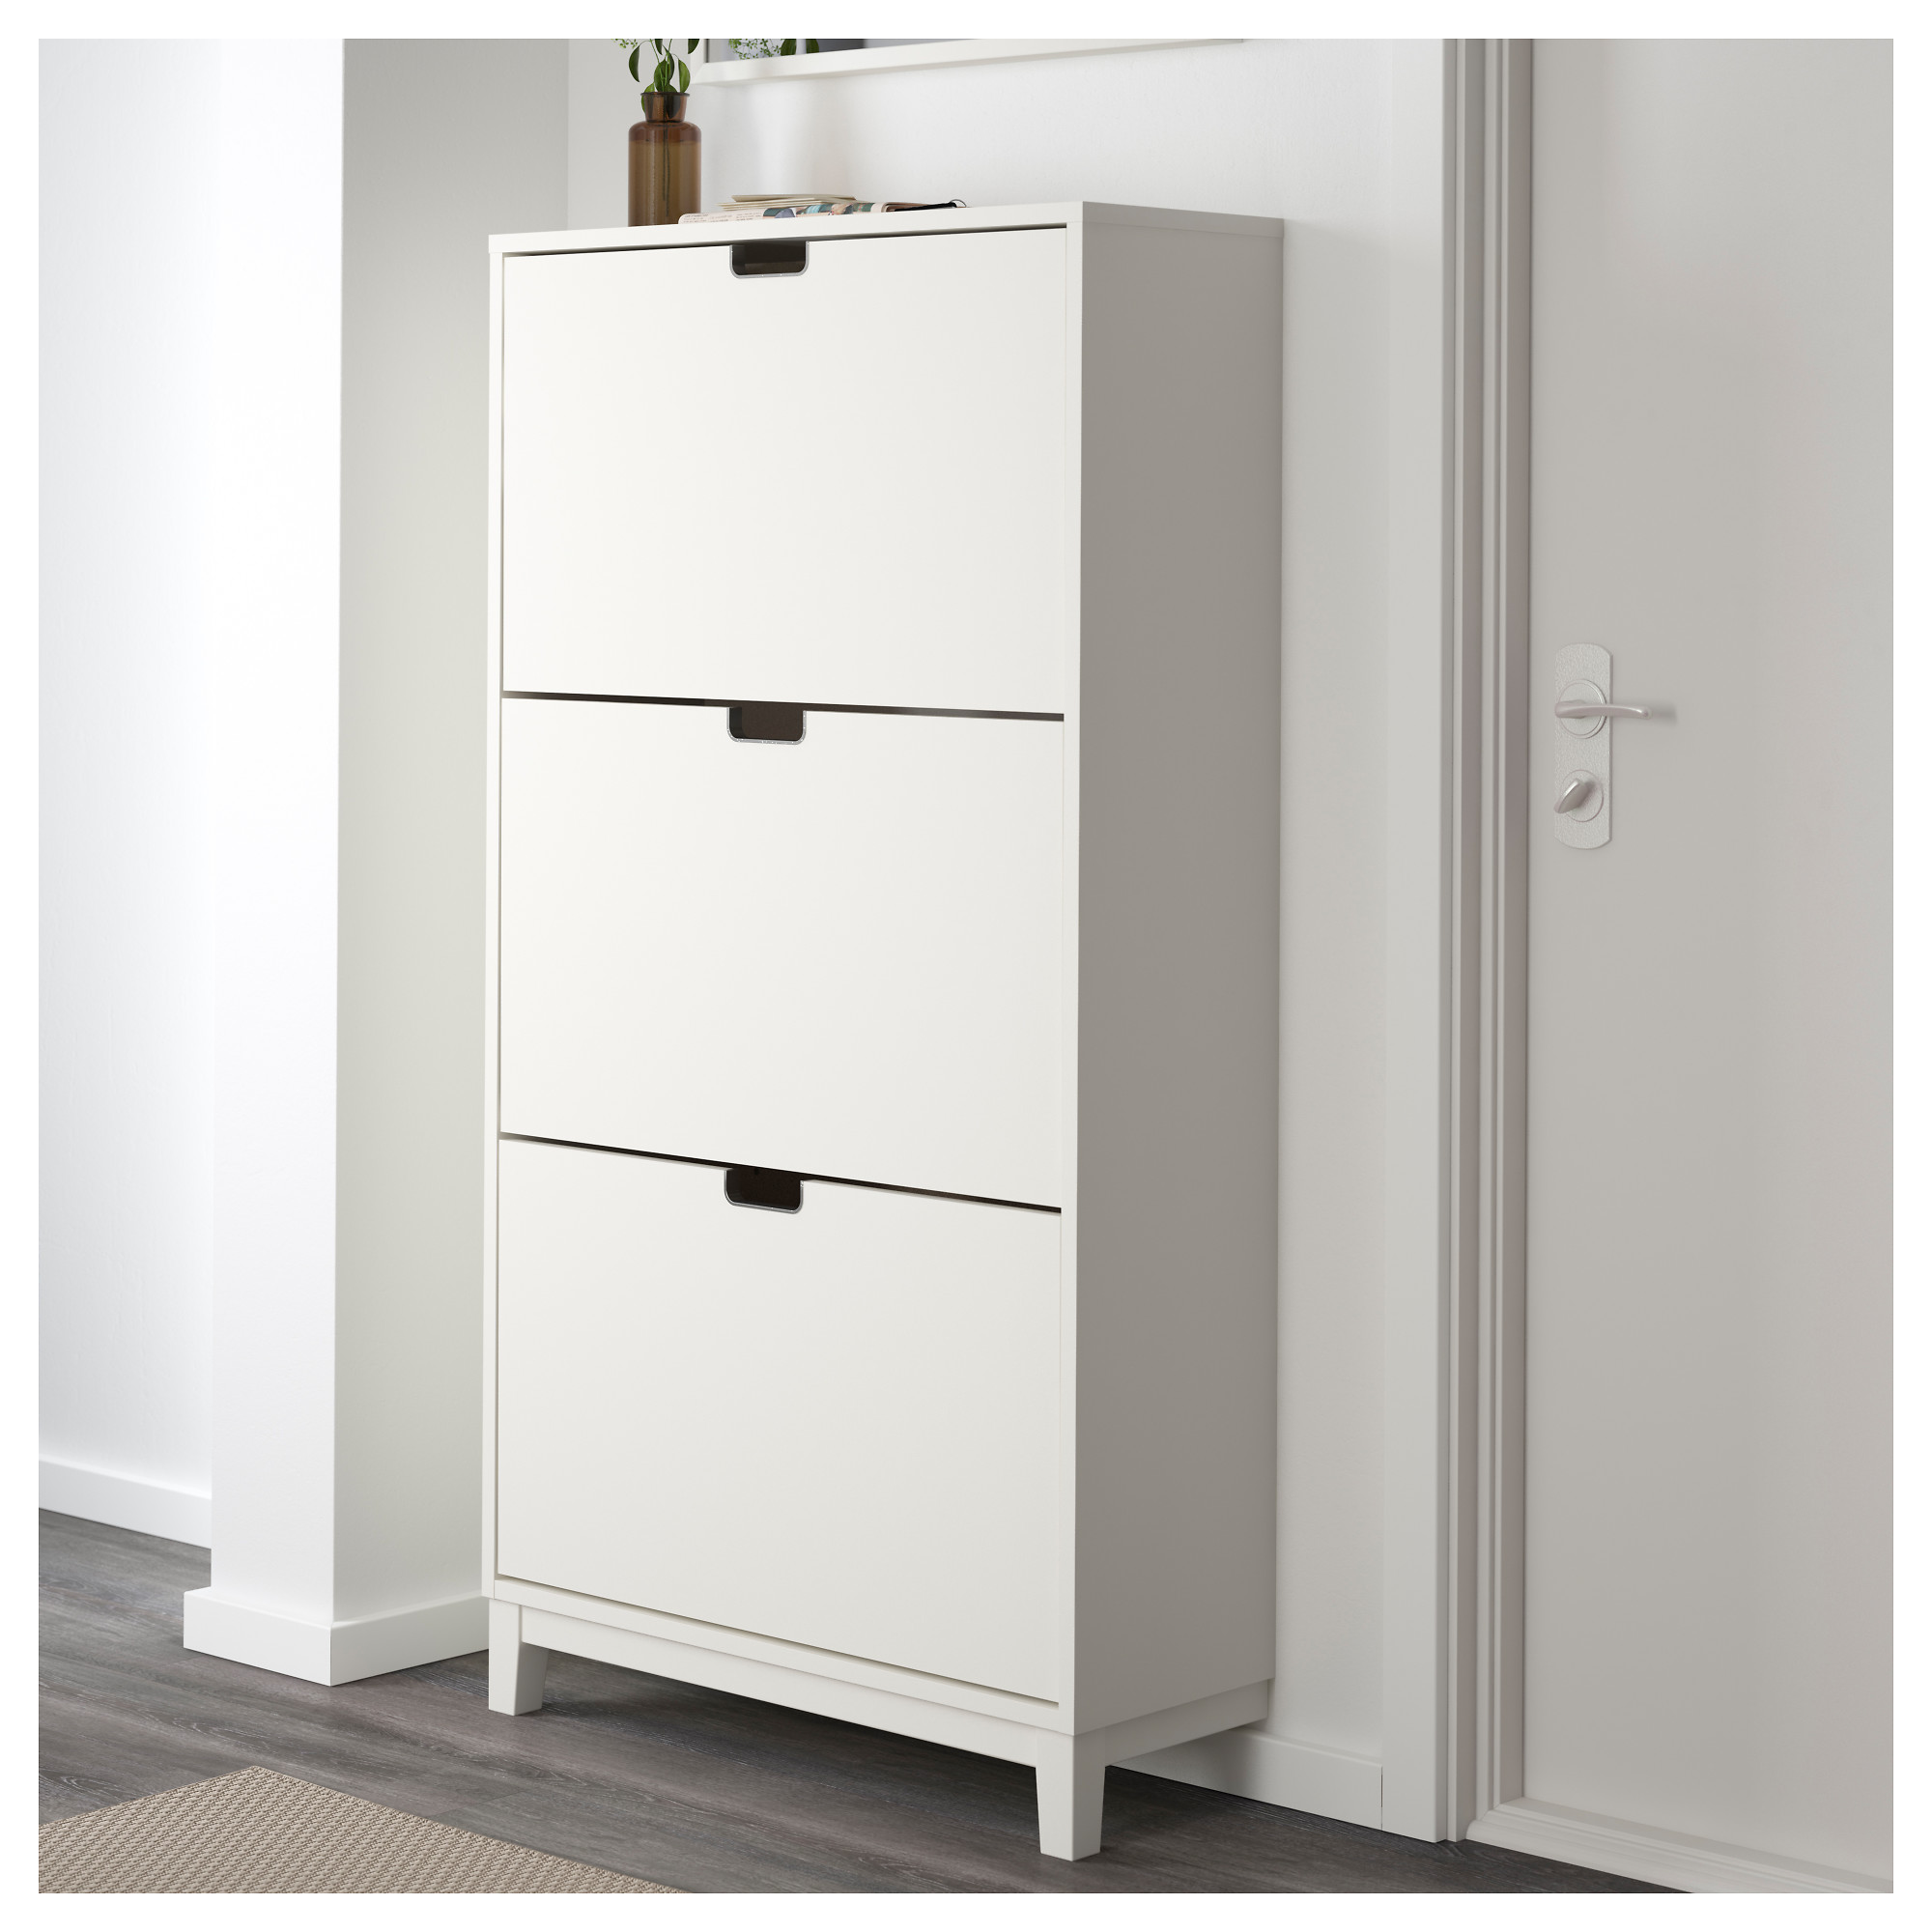  ST LL  shoe  cabinet  with 3 compartments white IKEA  